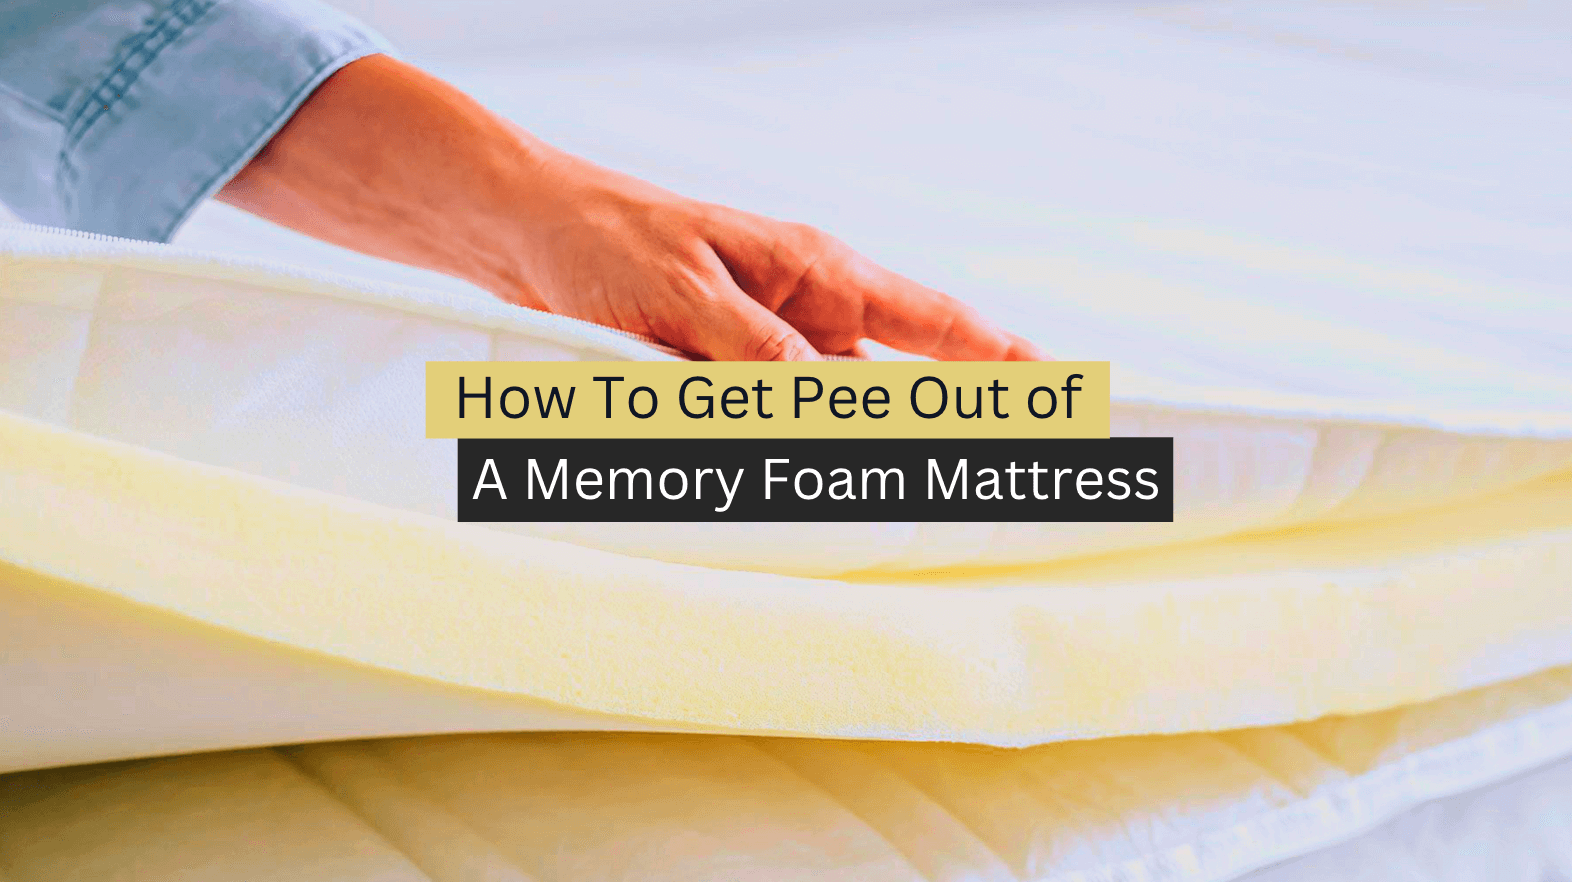 How To Get Pee Out of a Memory Foam Mattress?